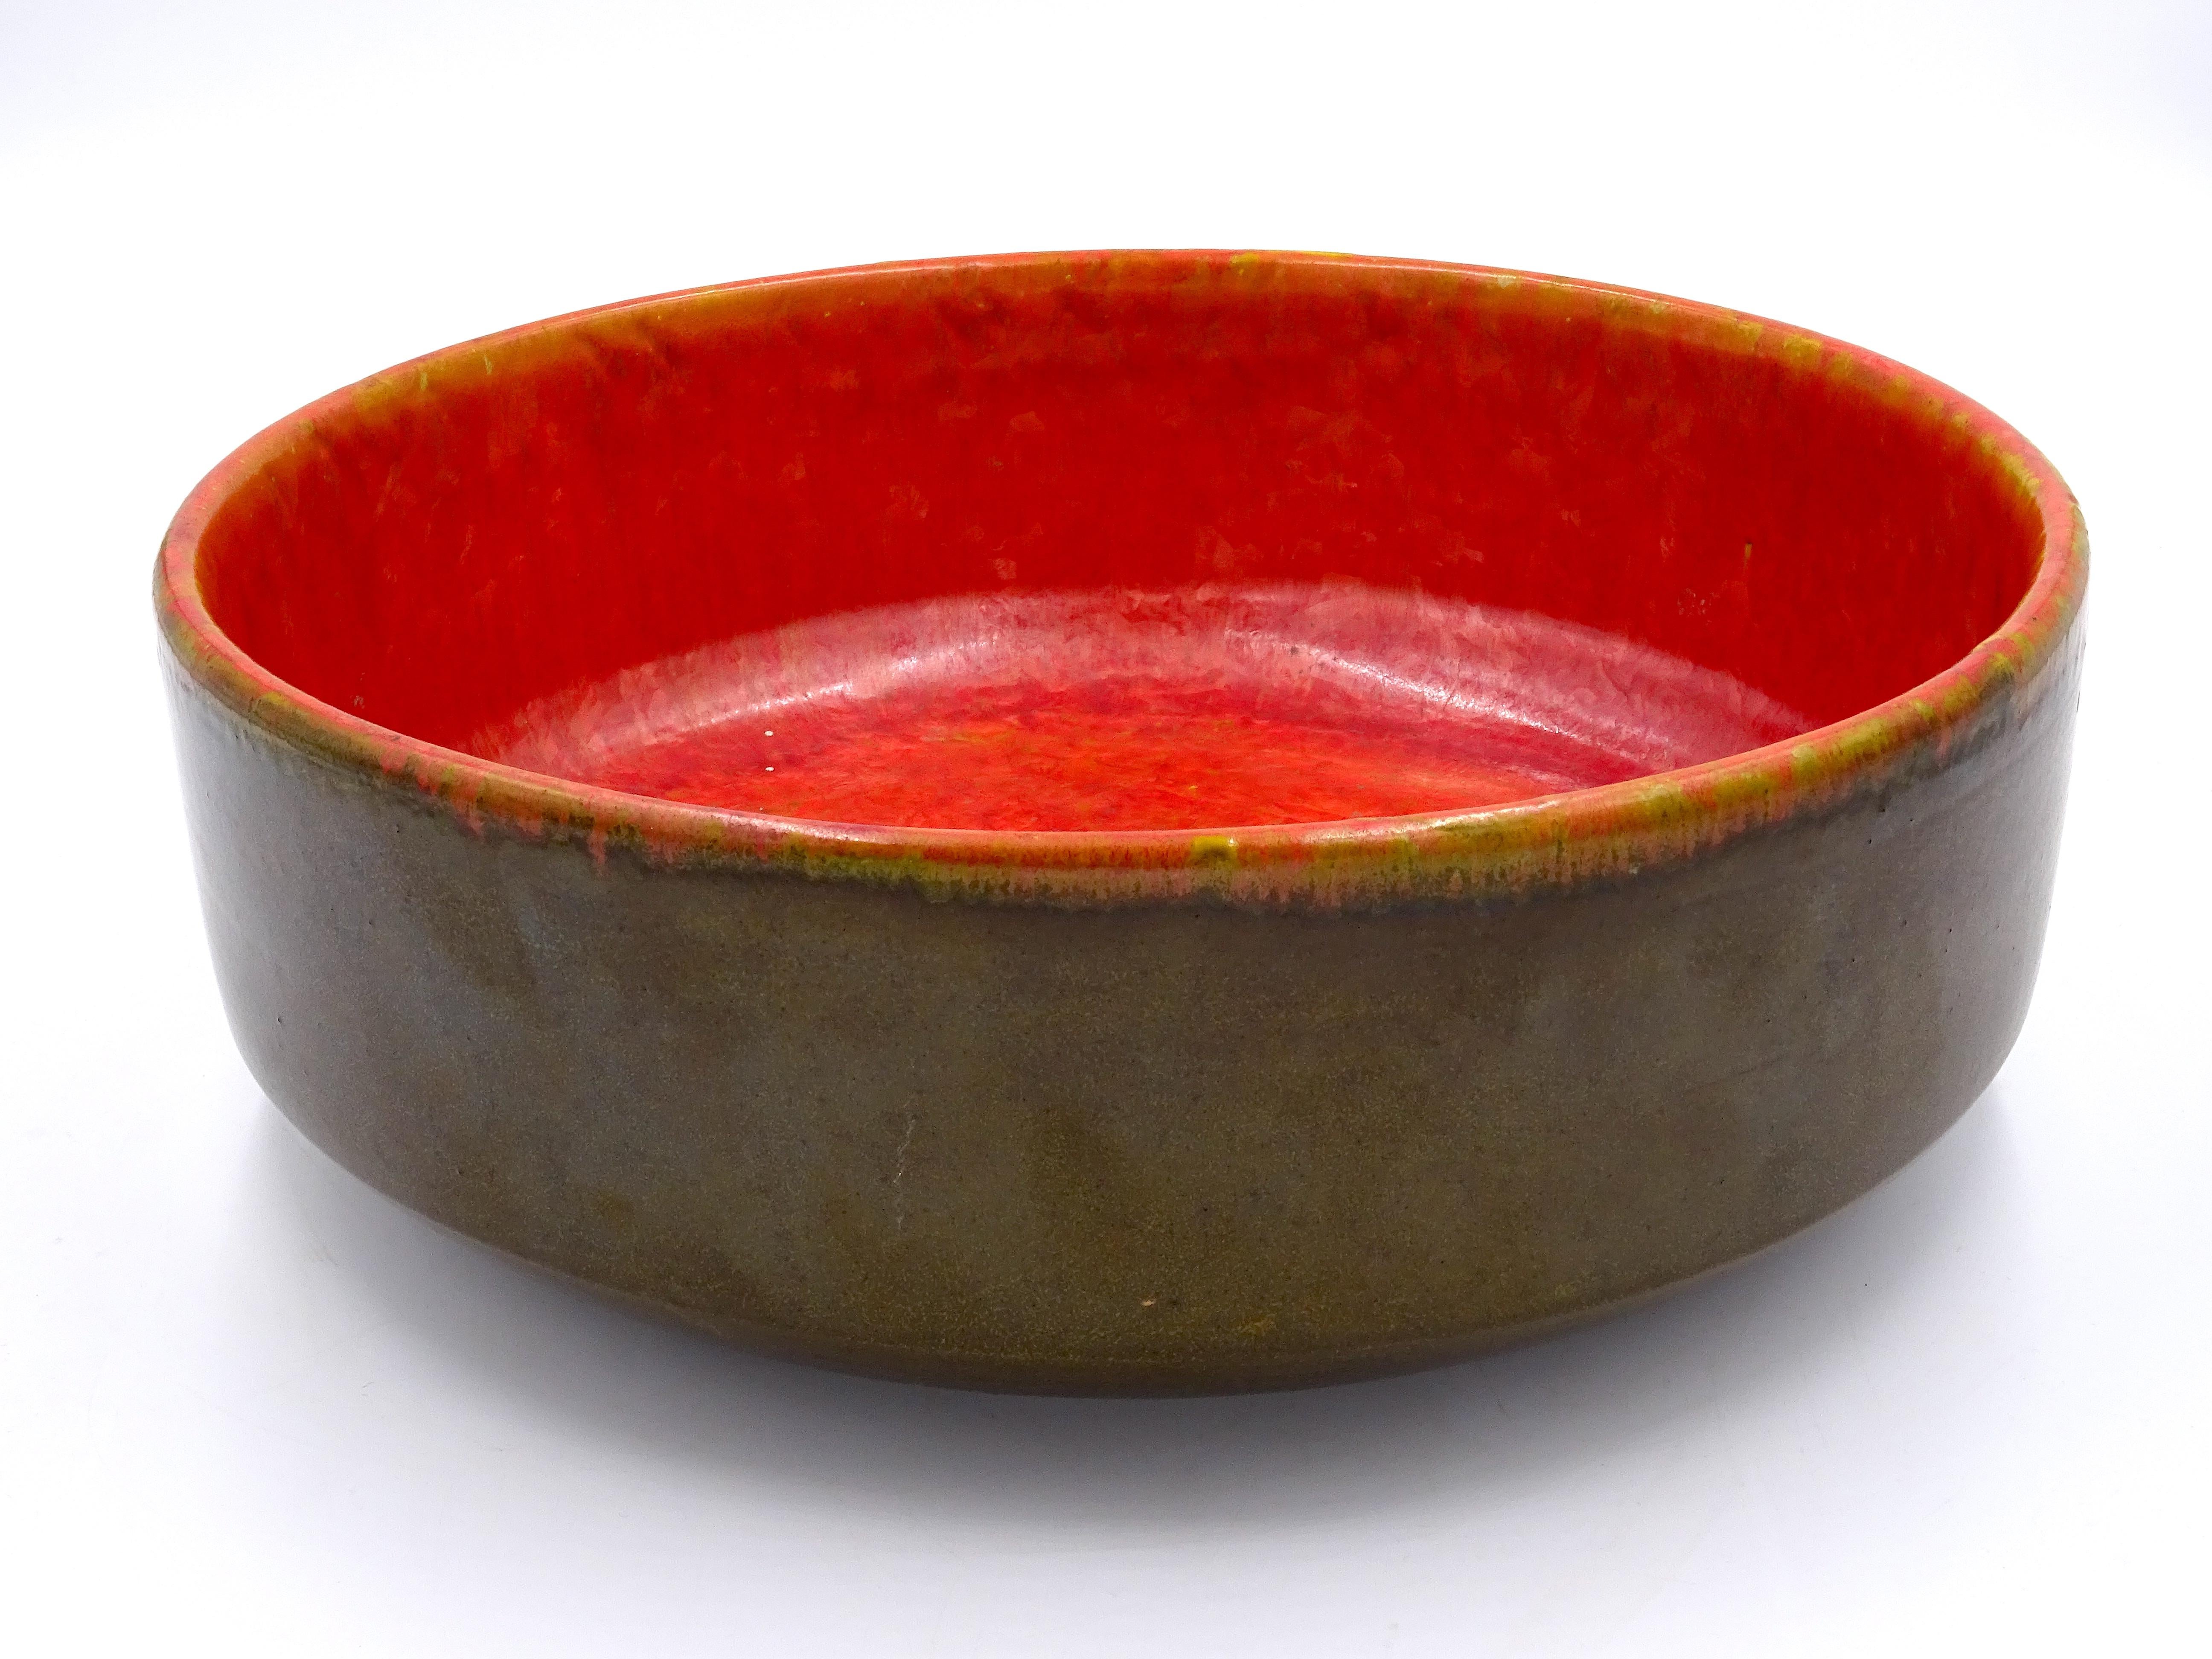 Large bowl/table centerpiece made of polychrome glazed ceramic by Italian ceramic artist and designer Alessio Tasca (Nove 1929 - Heilbunn 2020) around the 1970s.

The centerpiece features vibrant orange and red accents that distinguish the inner